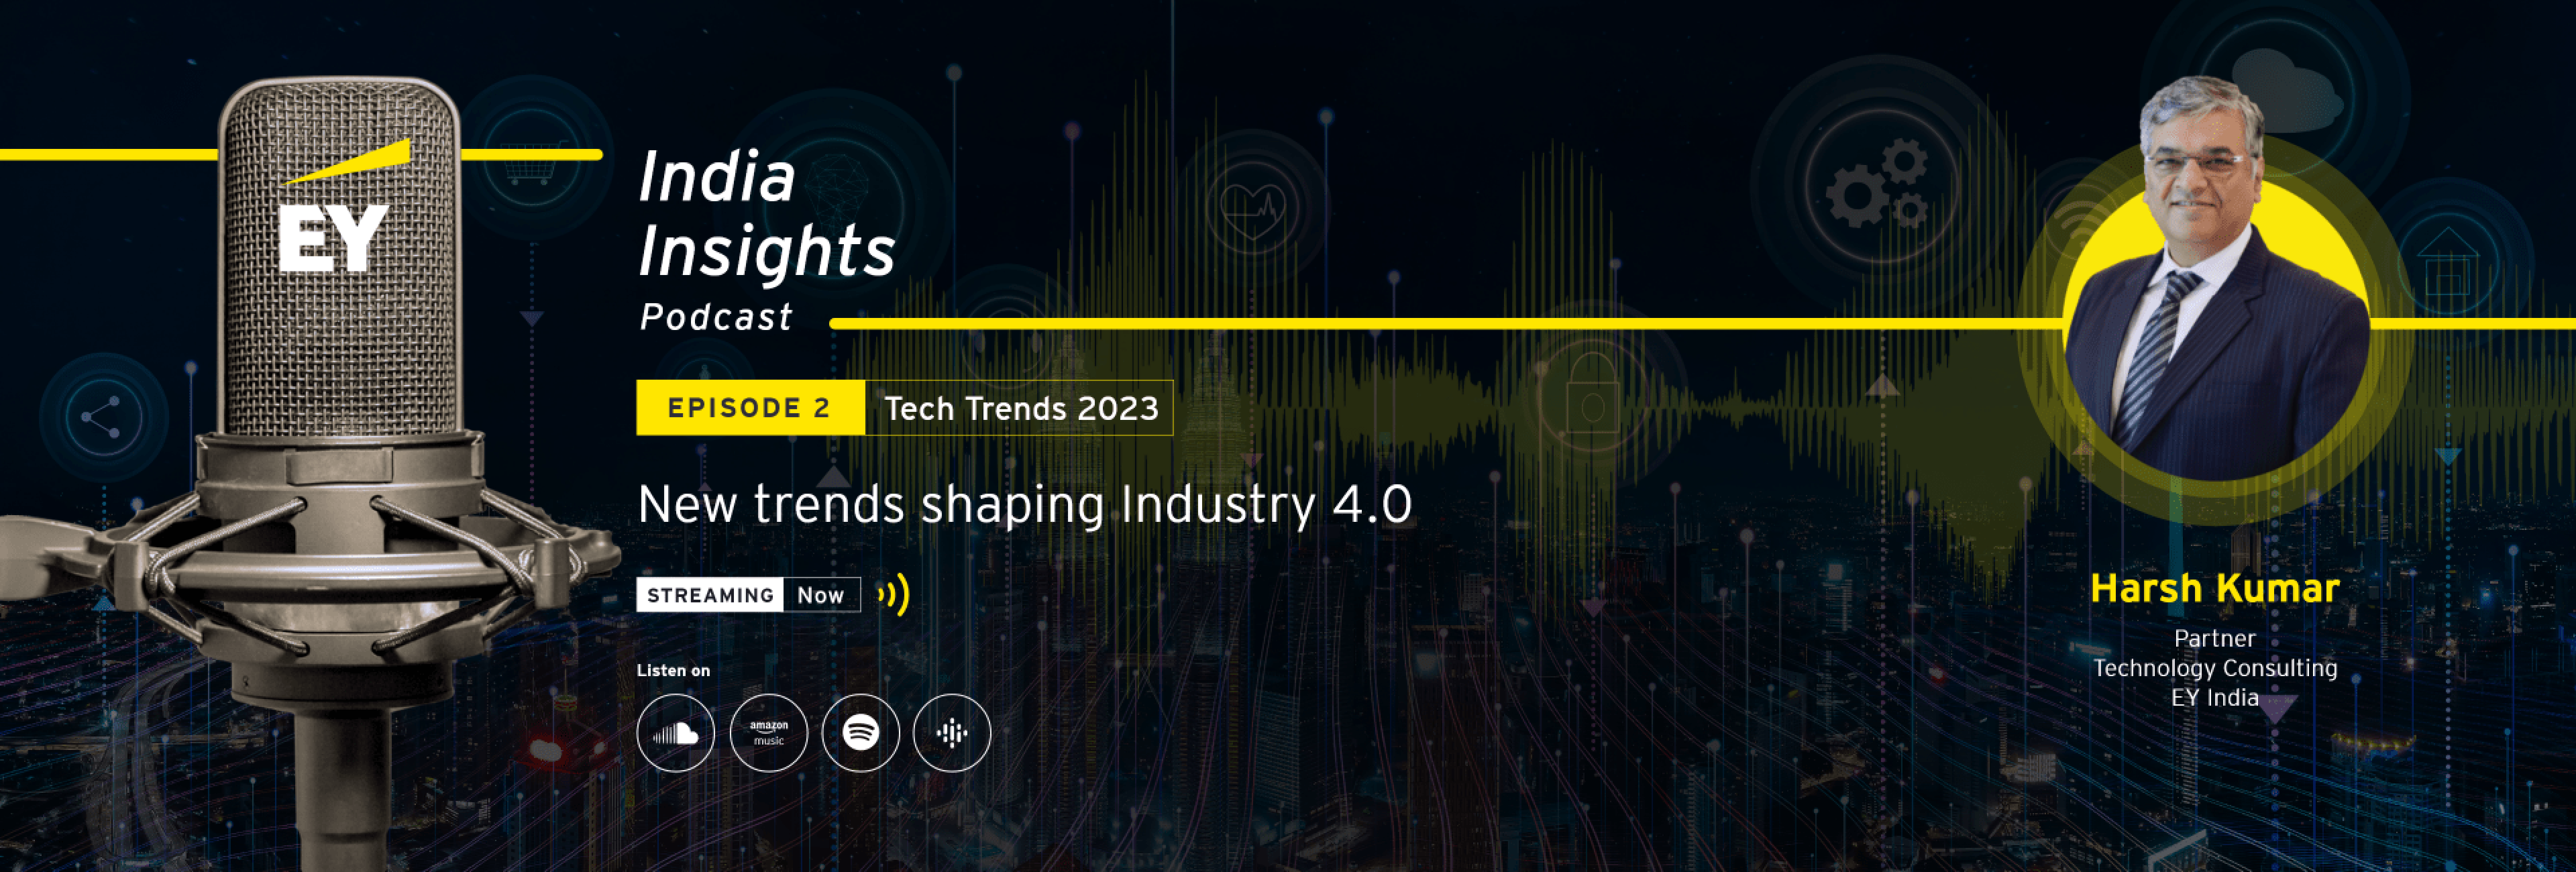 New trends shaping Industry 4.0